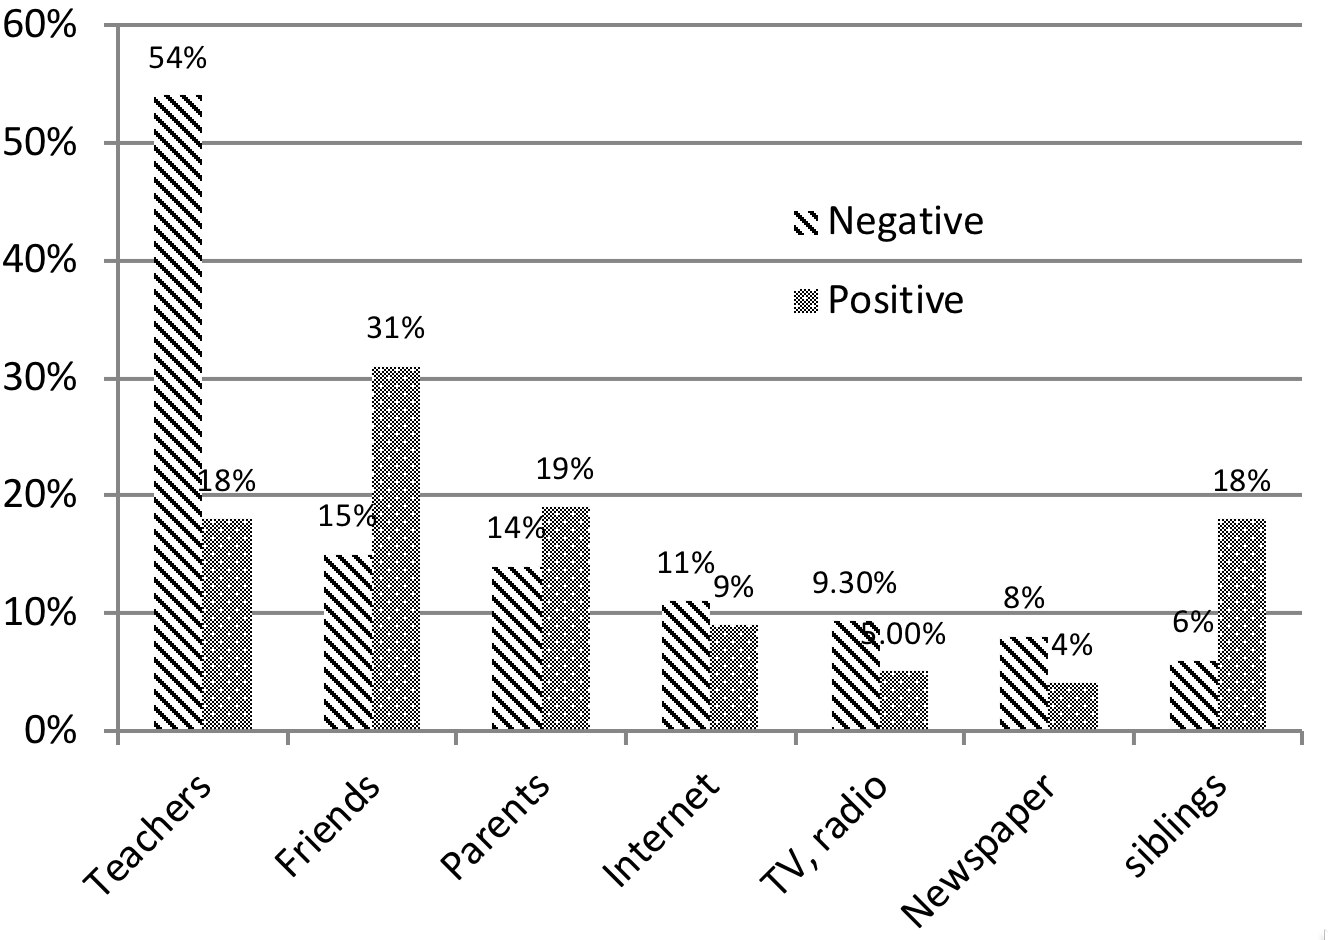 Figure 3: Origin of the negative and positive opinions about Wikipedia